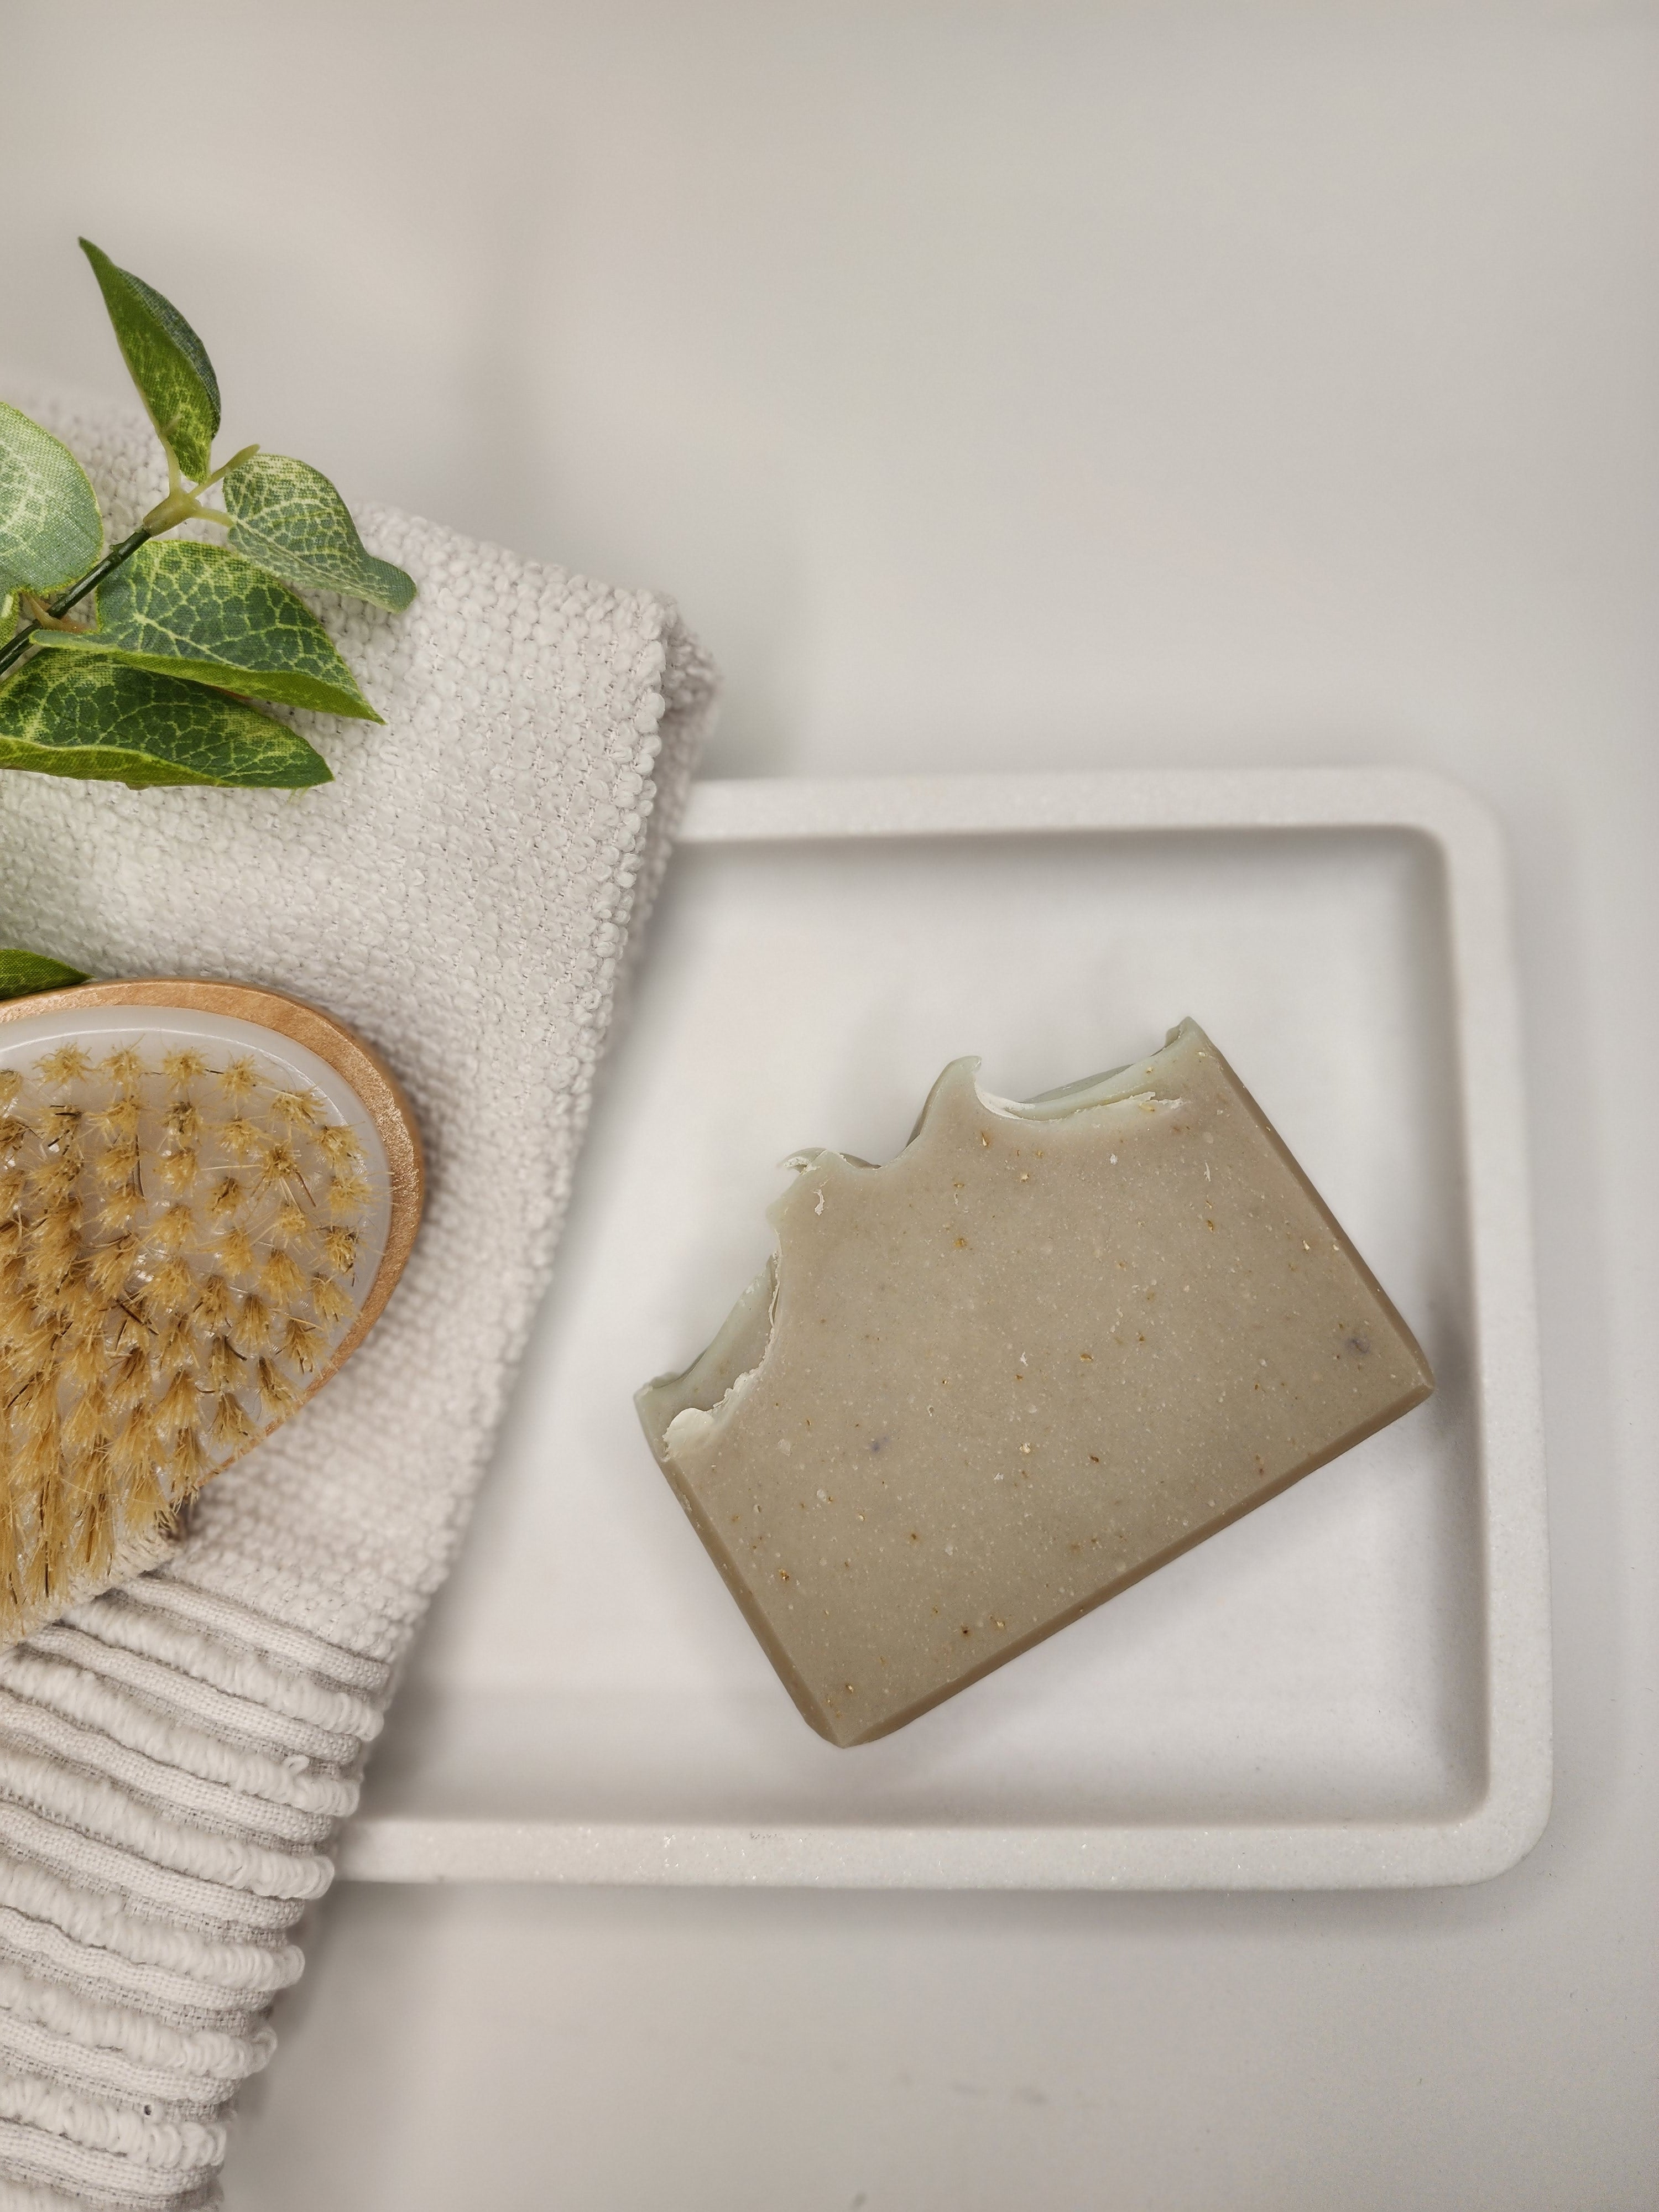 A grey bar of Lavender + Oatmeal handmade soap on a white platter next to a light grey towel and brush